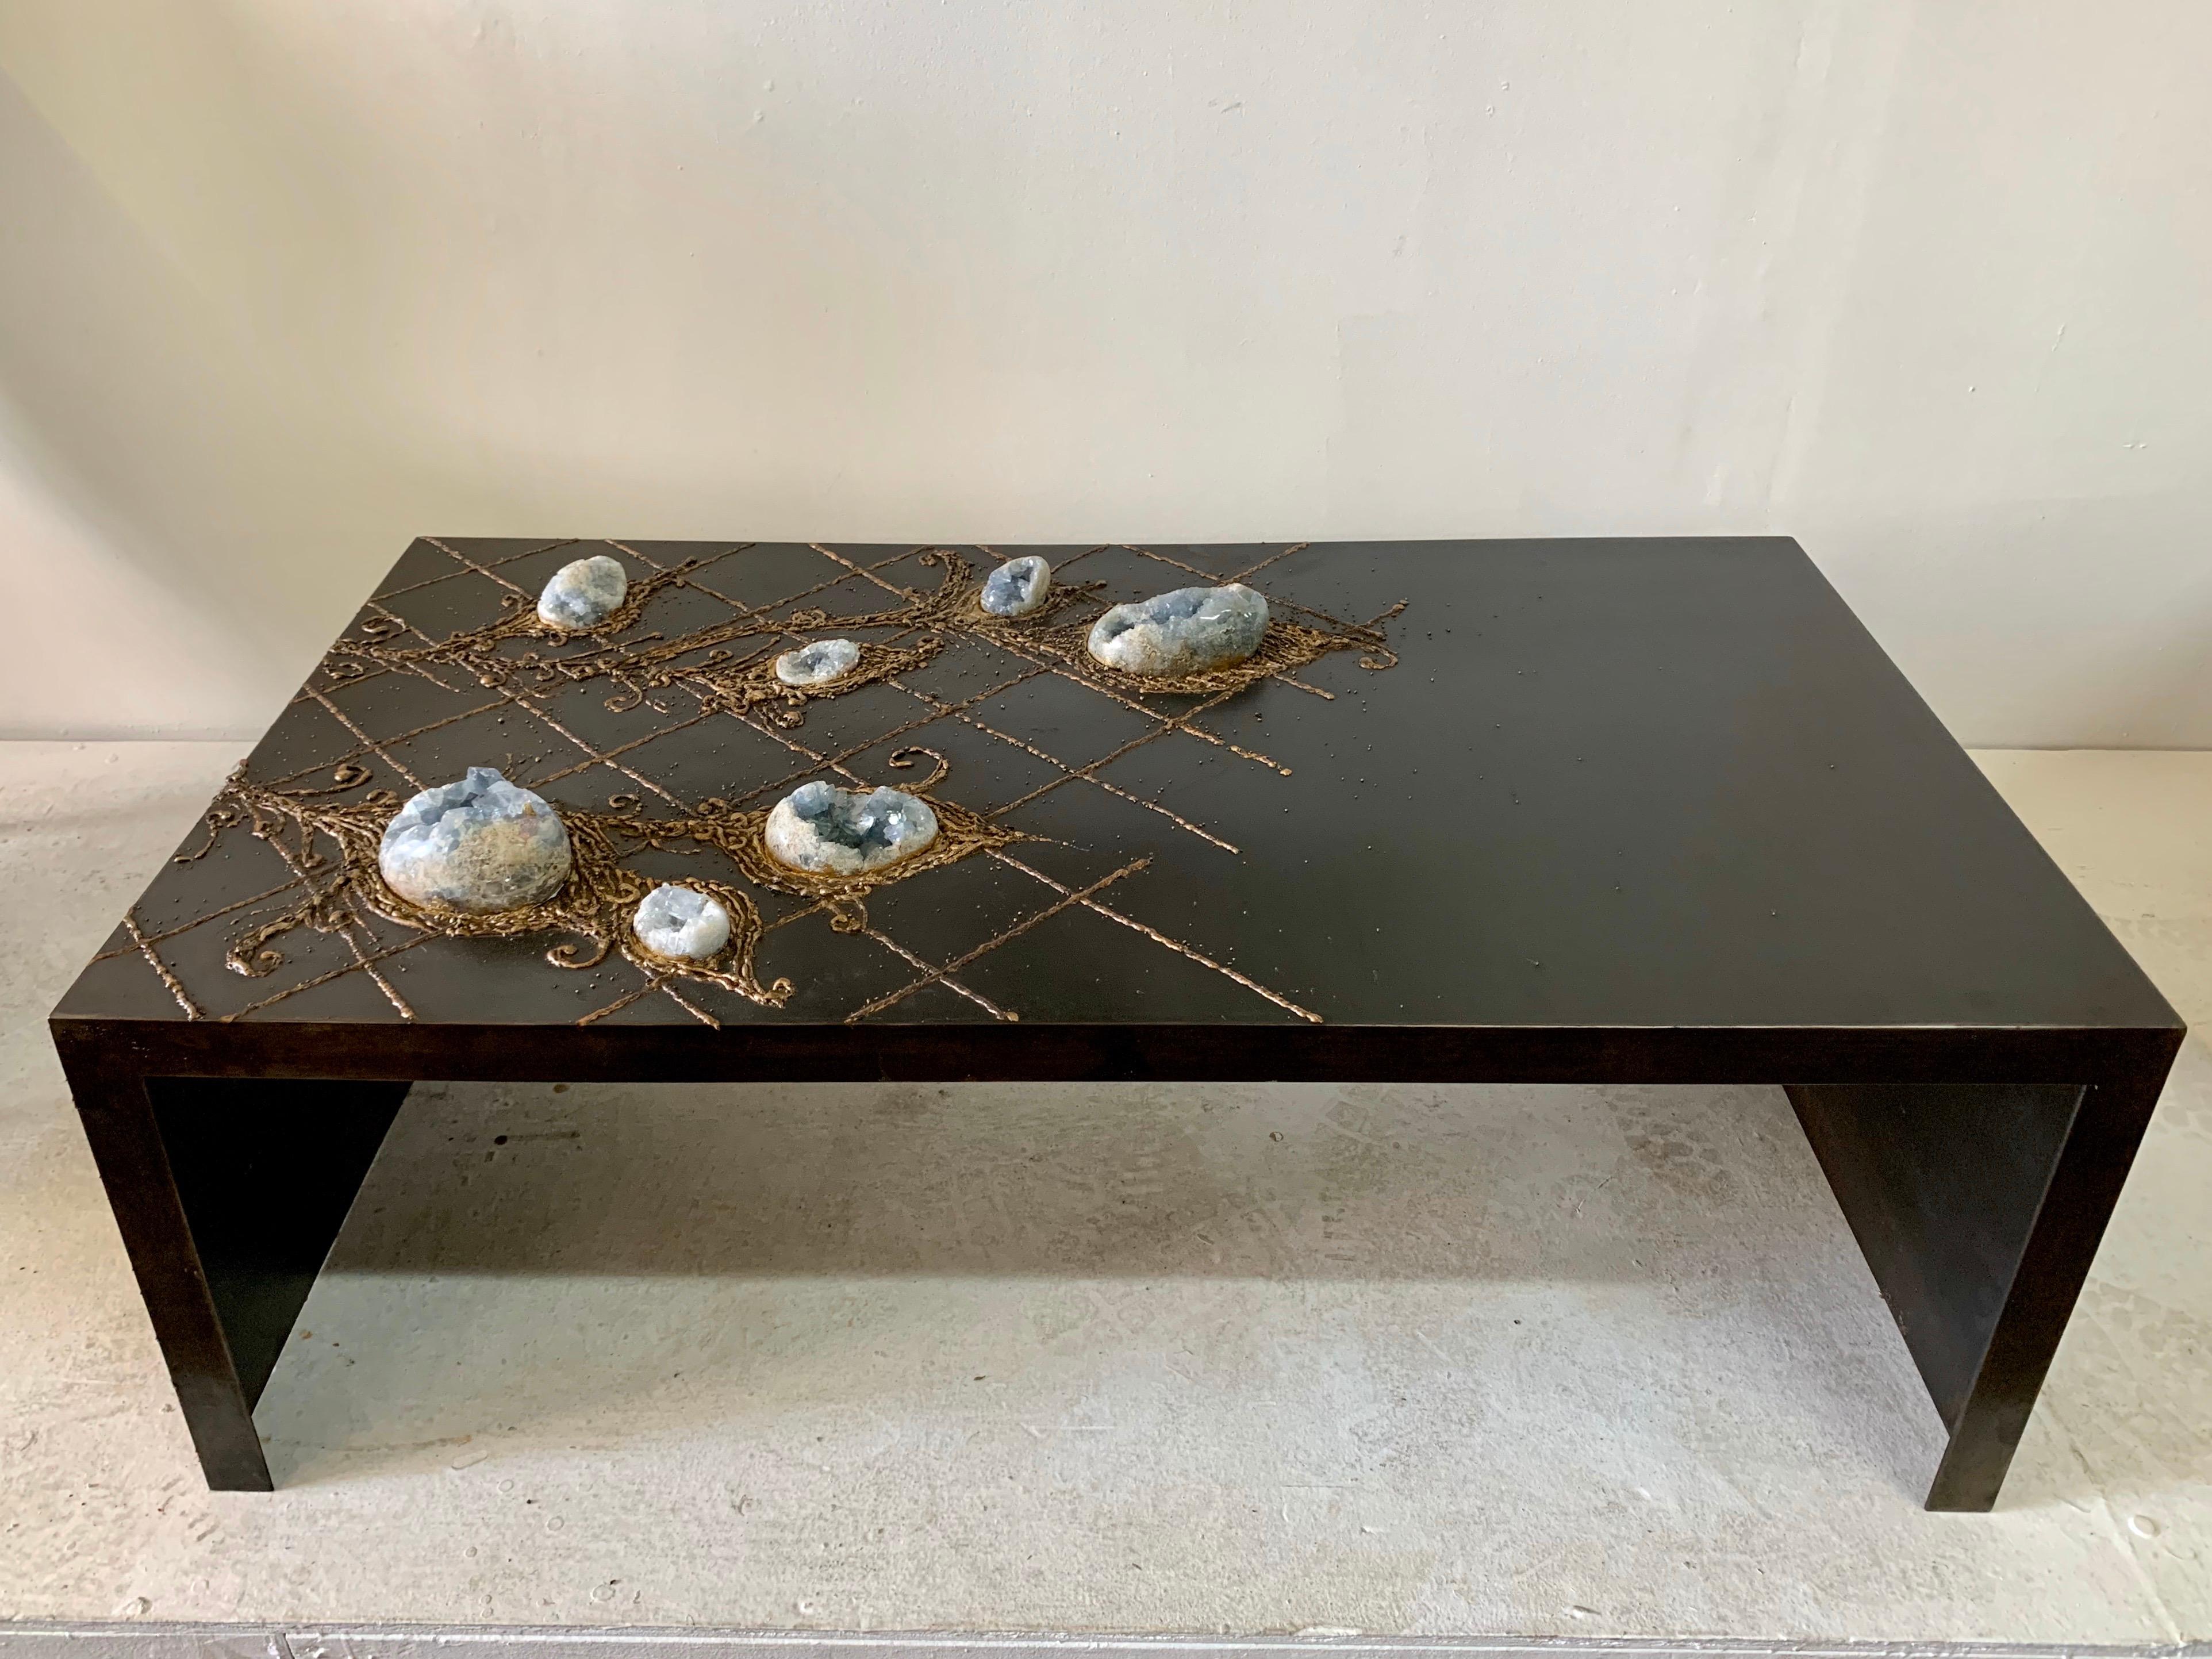 This is a one-of-kind piece. 7 raw celestite geode eggs/ blue crystals embedded in this large and heavy iron coffee table. These natural stone eggs appear like tulip bulbs with an intricate floral bronze embroidered design. This is bronze over